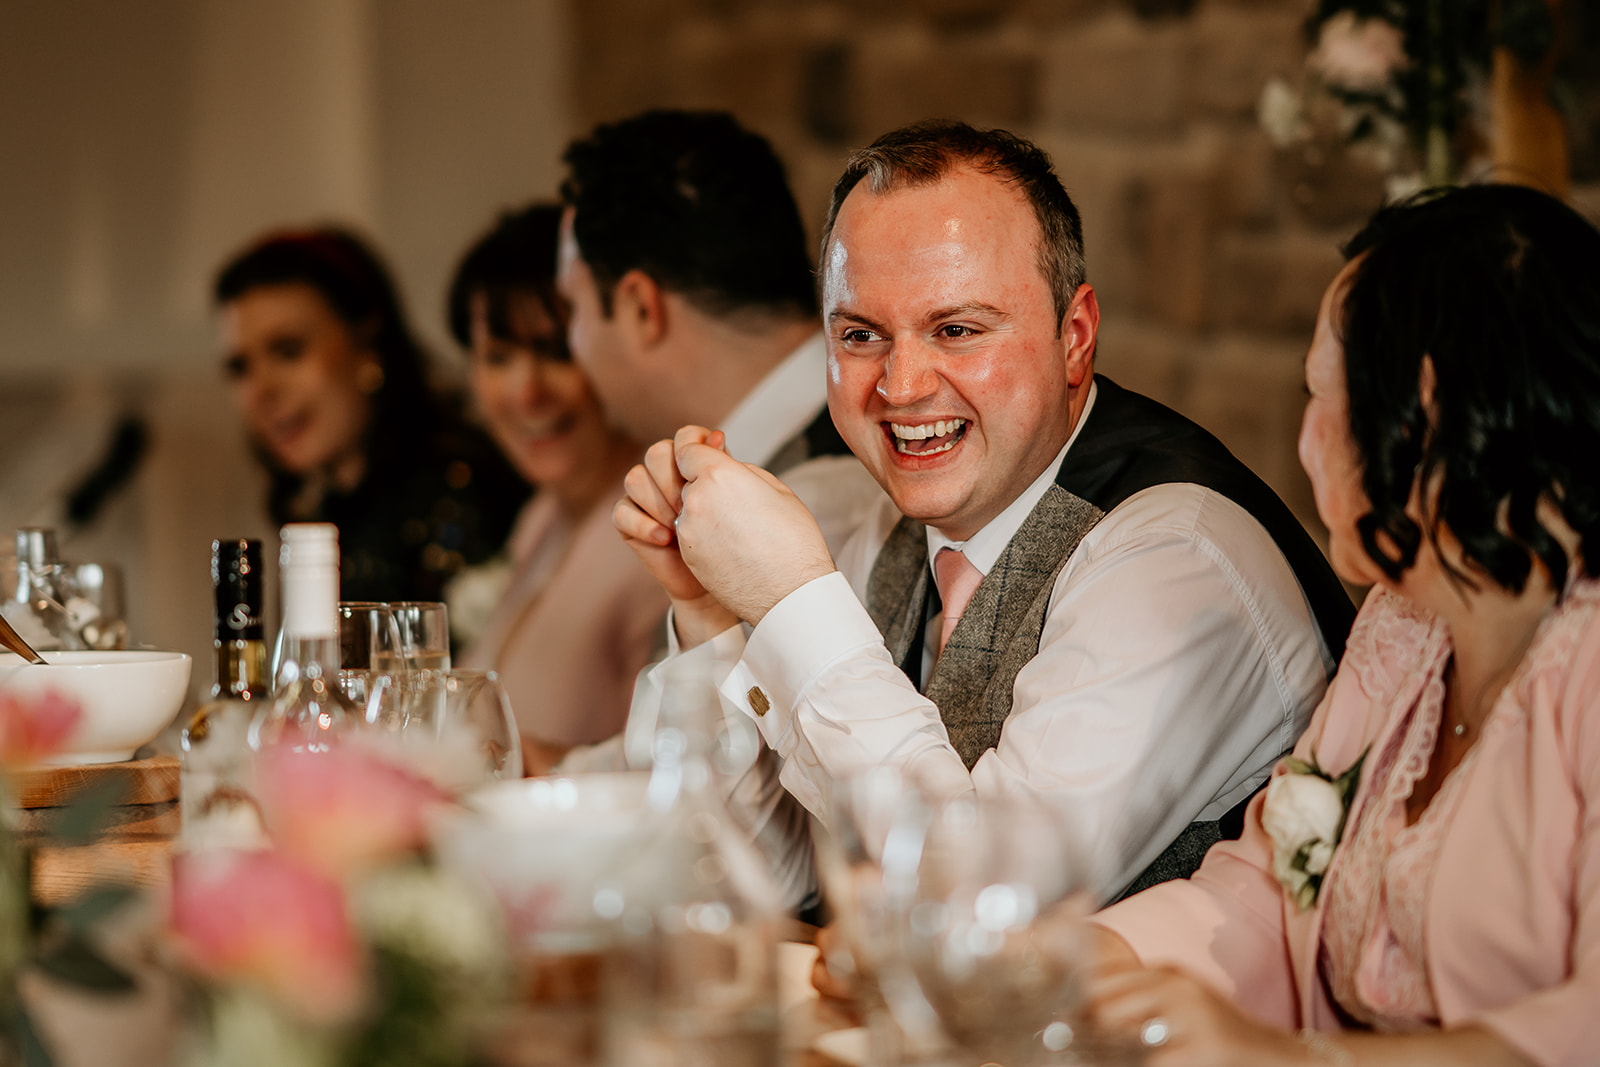 laughing at speeches on wedding day